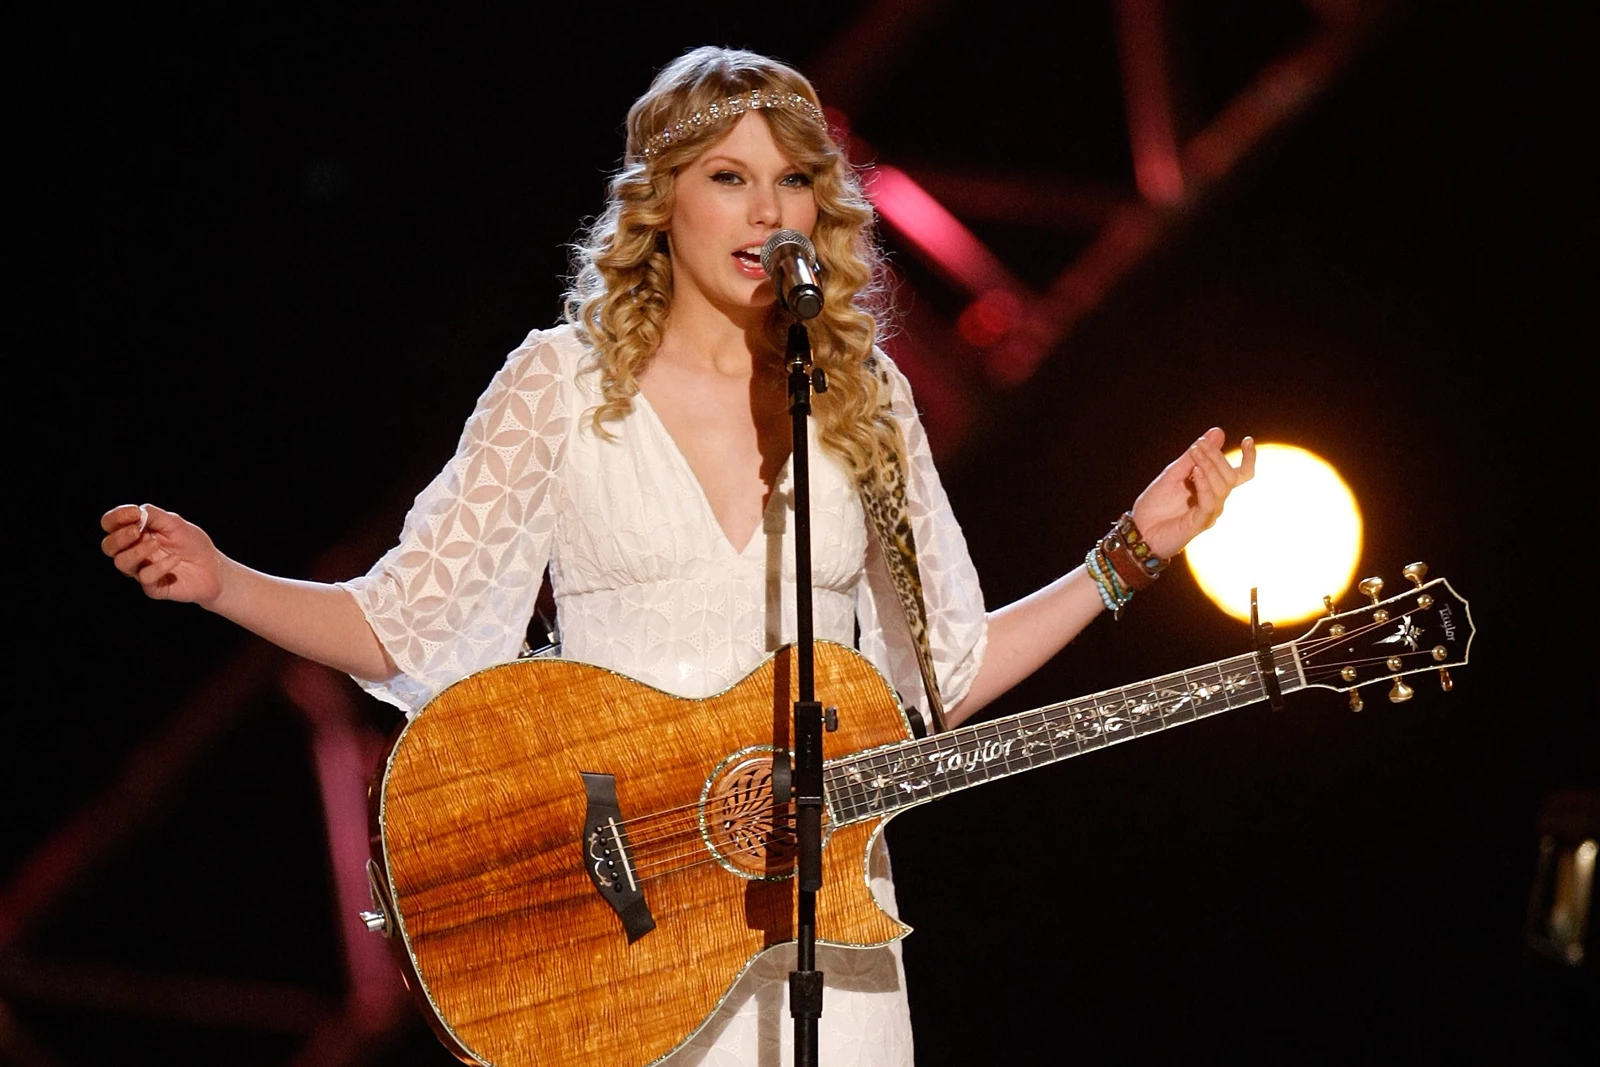 attachment-taylor-swift-fearless-tour-2009